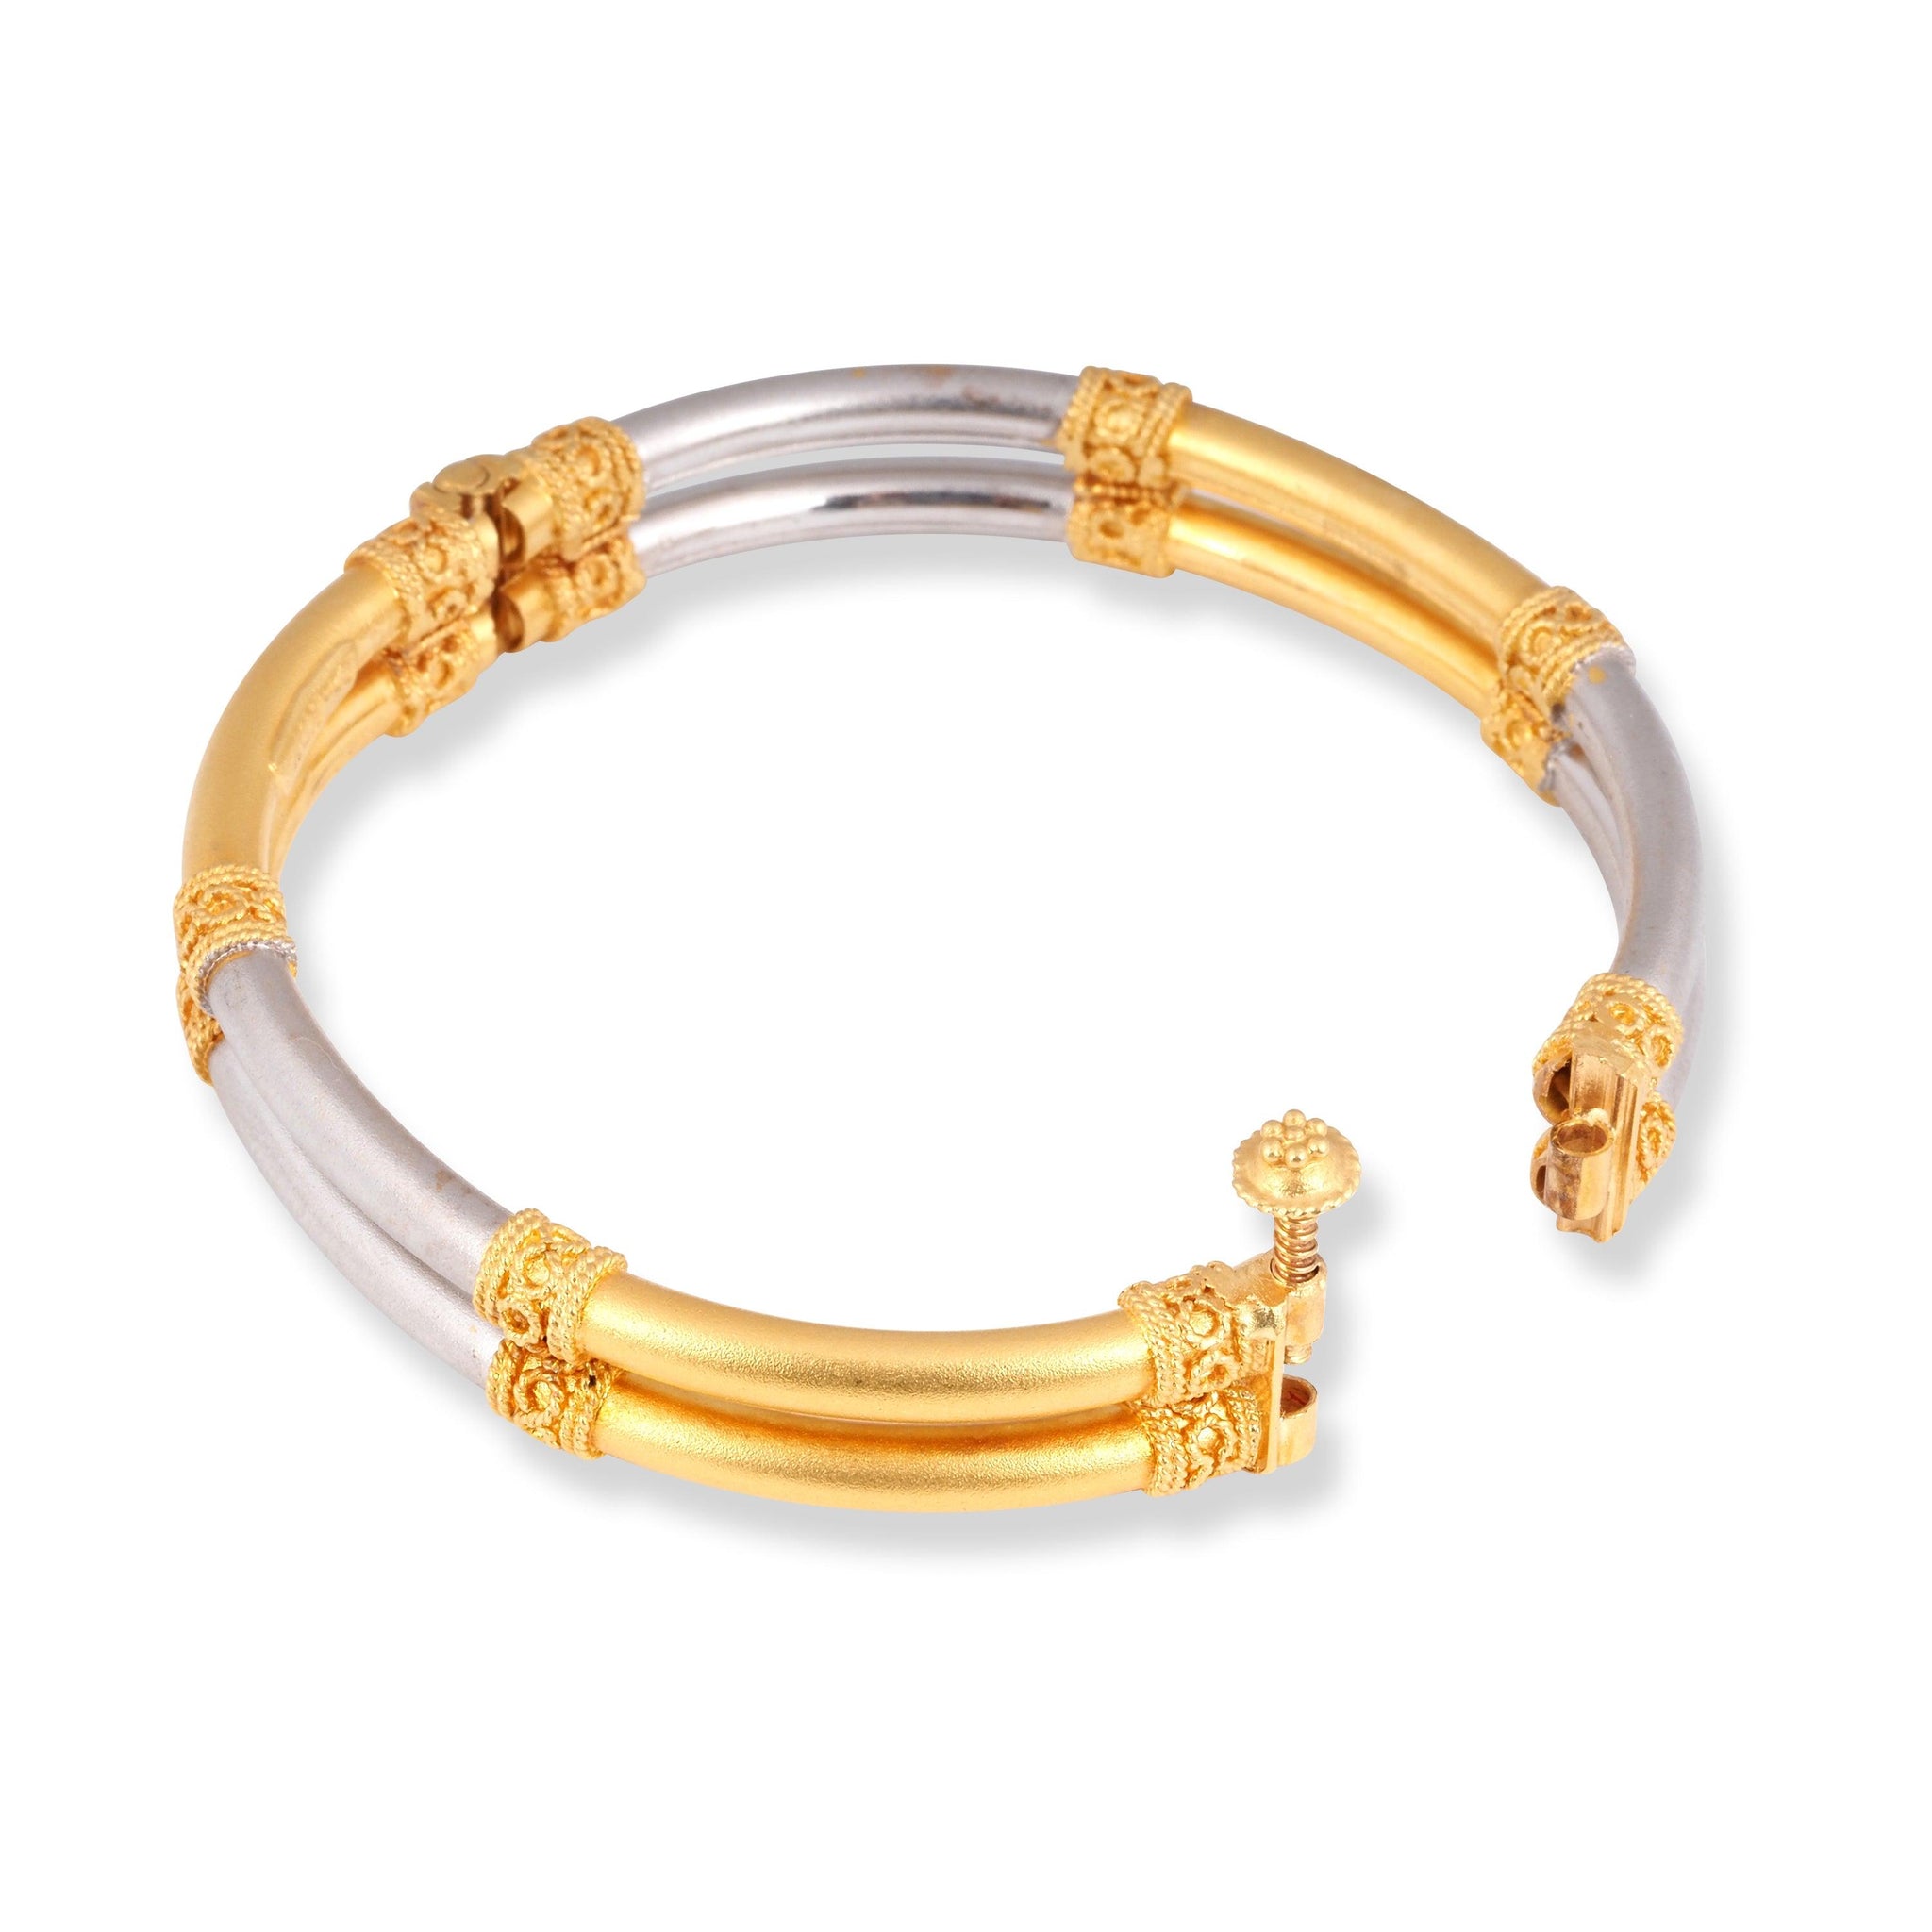 22ct Yellow Gold Openable Bangle with Rhodium Plating Design at Intervals B-8565